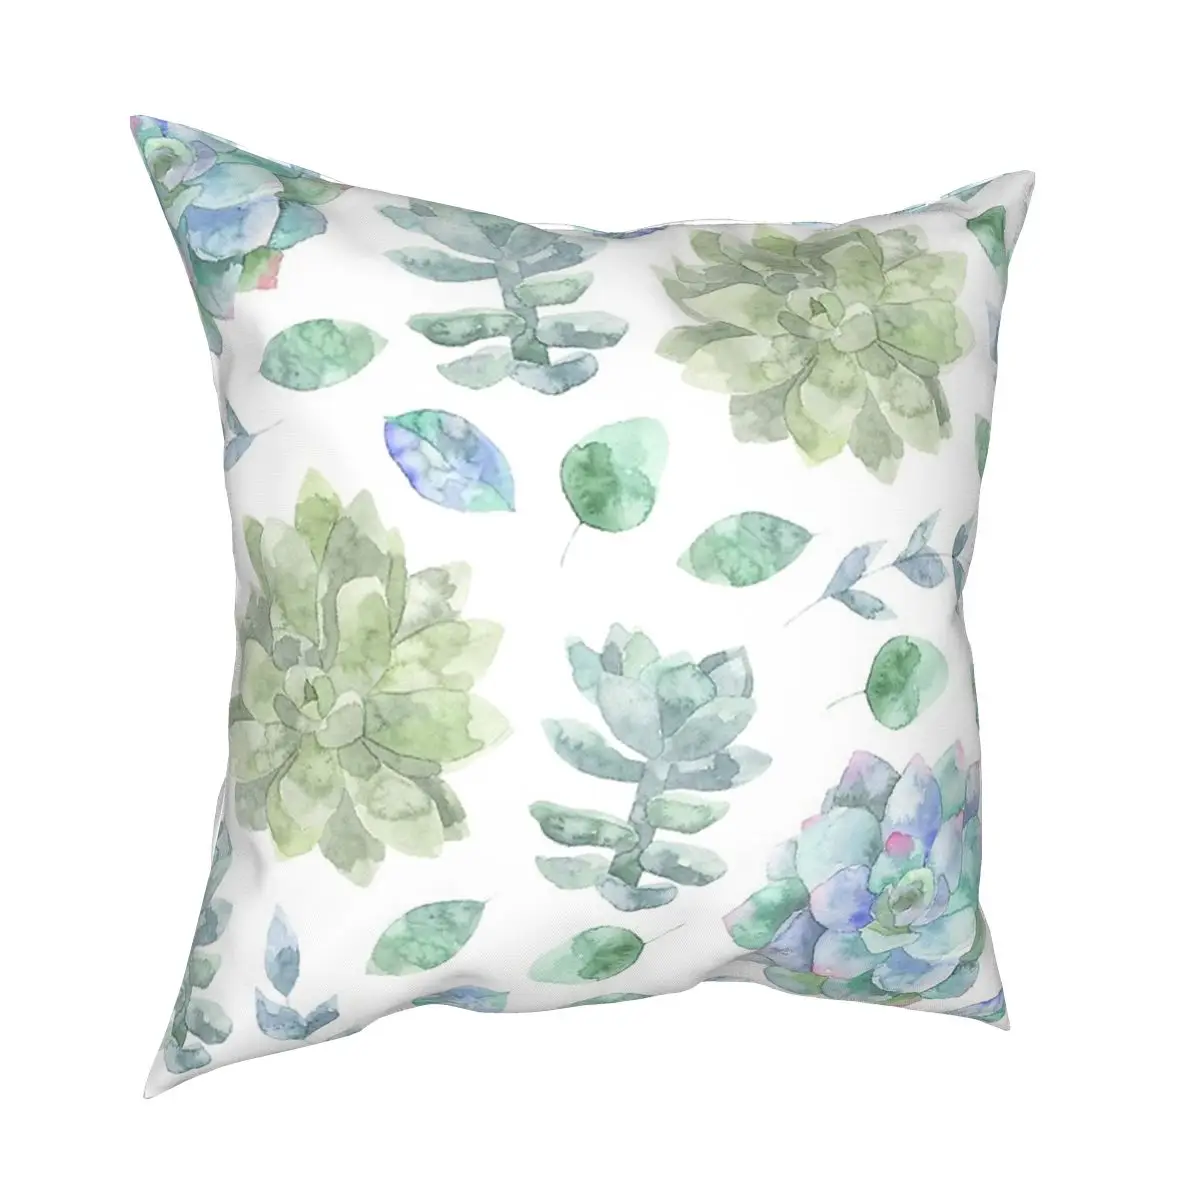 

Succulent Watercolor Cushions for Sofa Vintage Cushion Covers Decorative Throw Pillows Cover floor pillow for sofa home